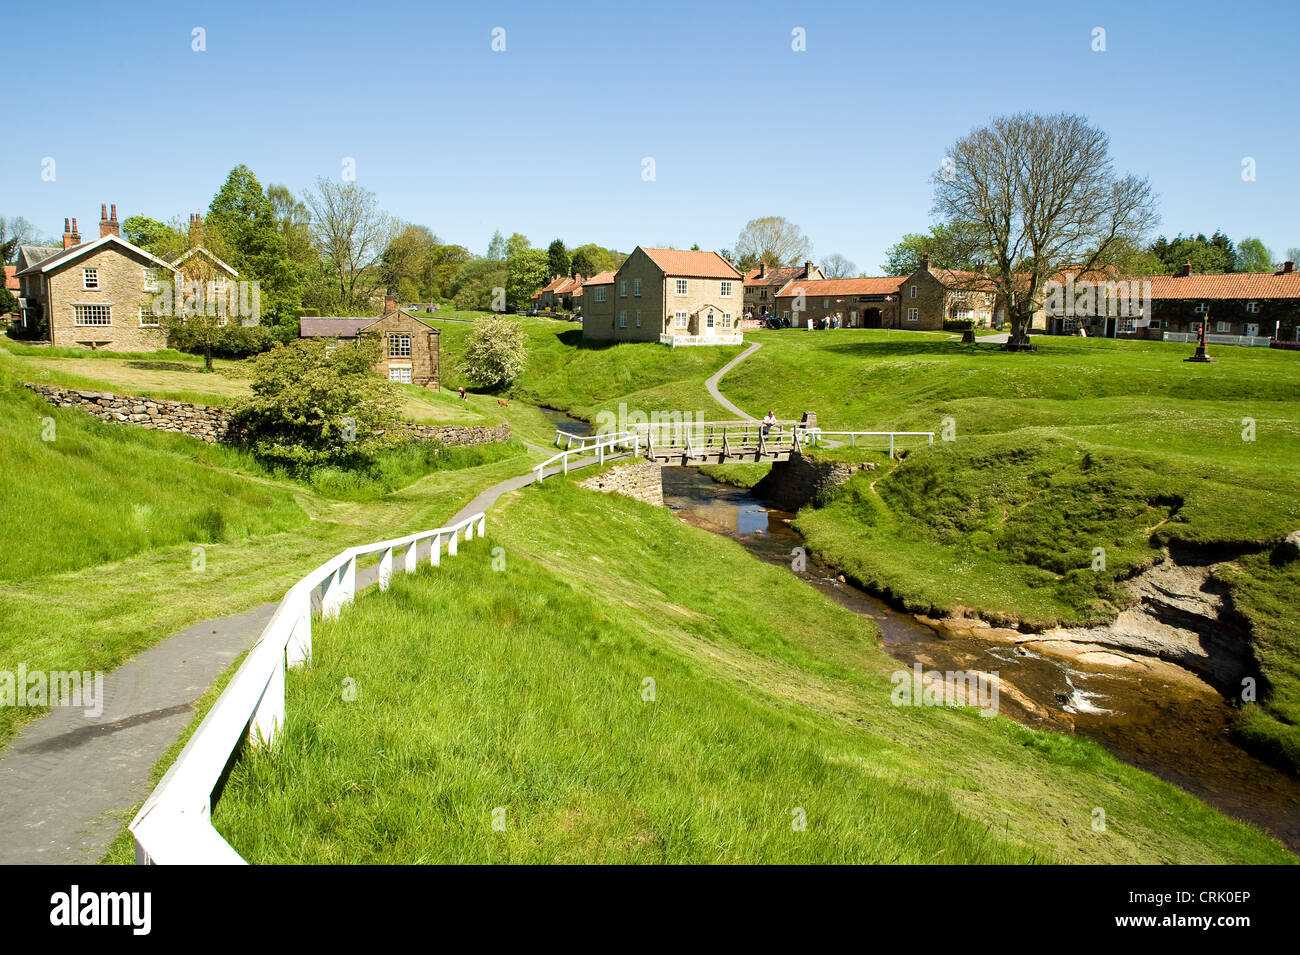 Traditional stone houses of Hutton Le Hole, North Yorks Moors National Park, Yorkshire, England Stock Photo